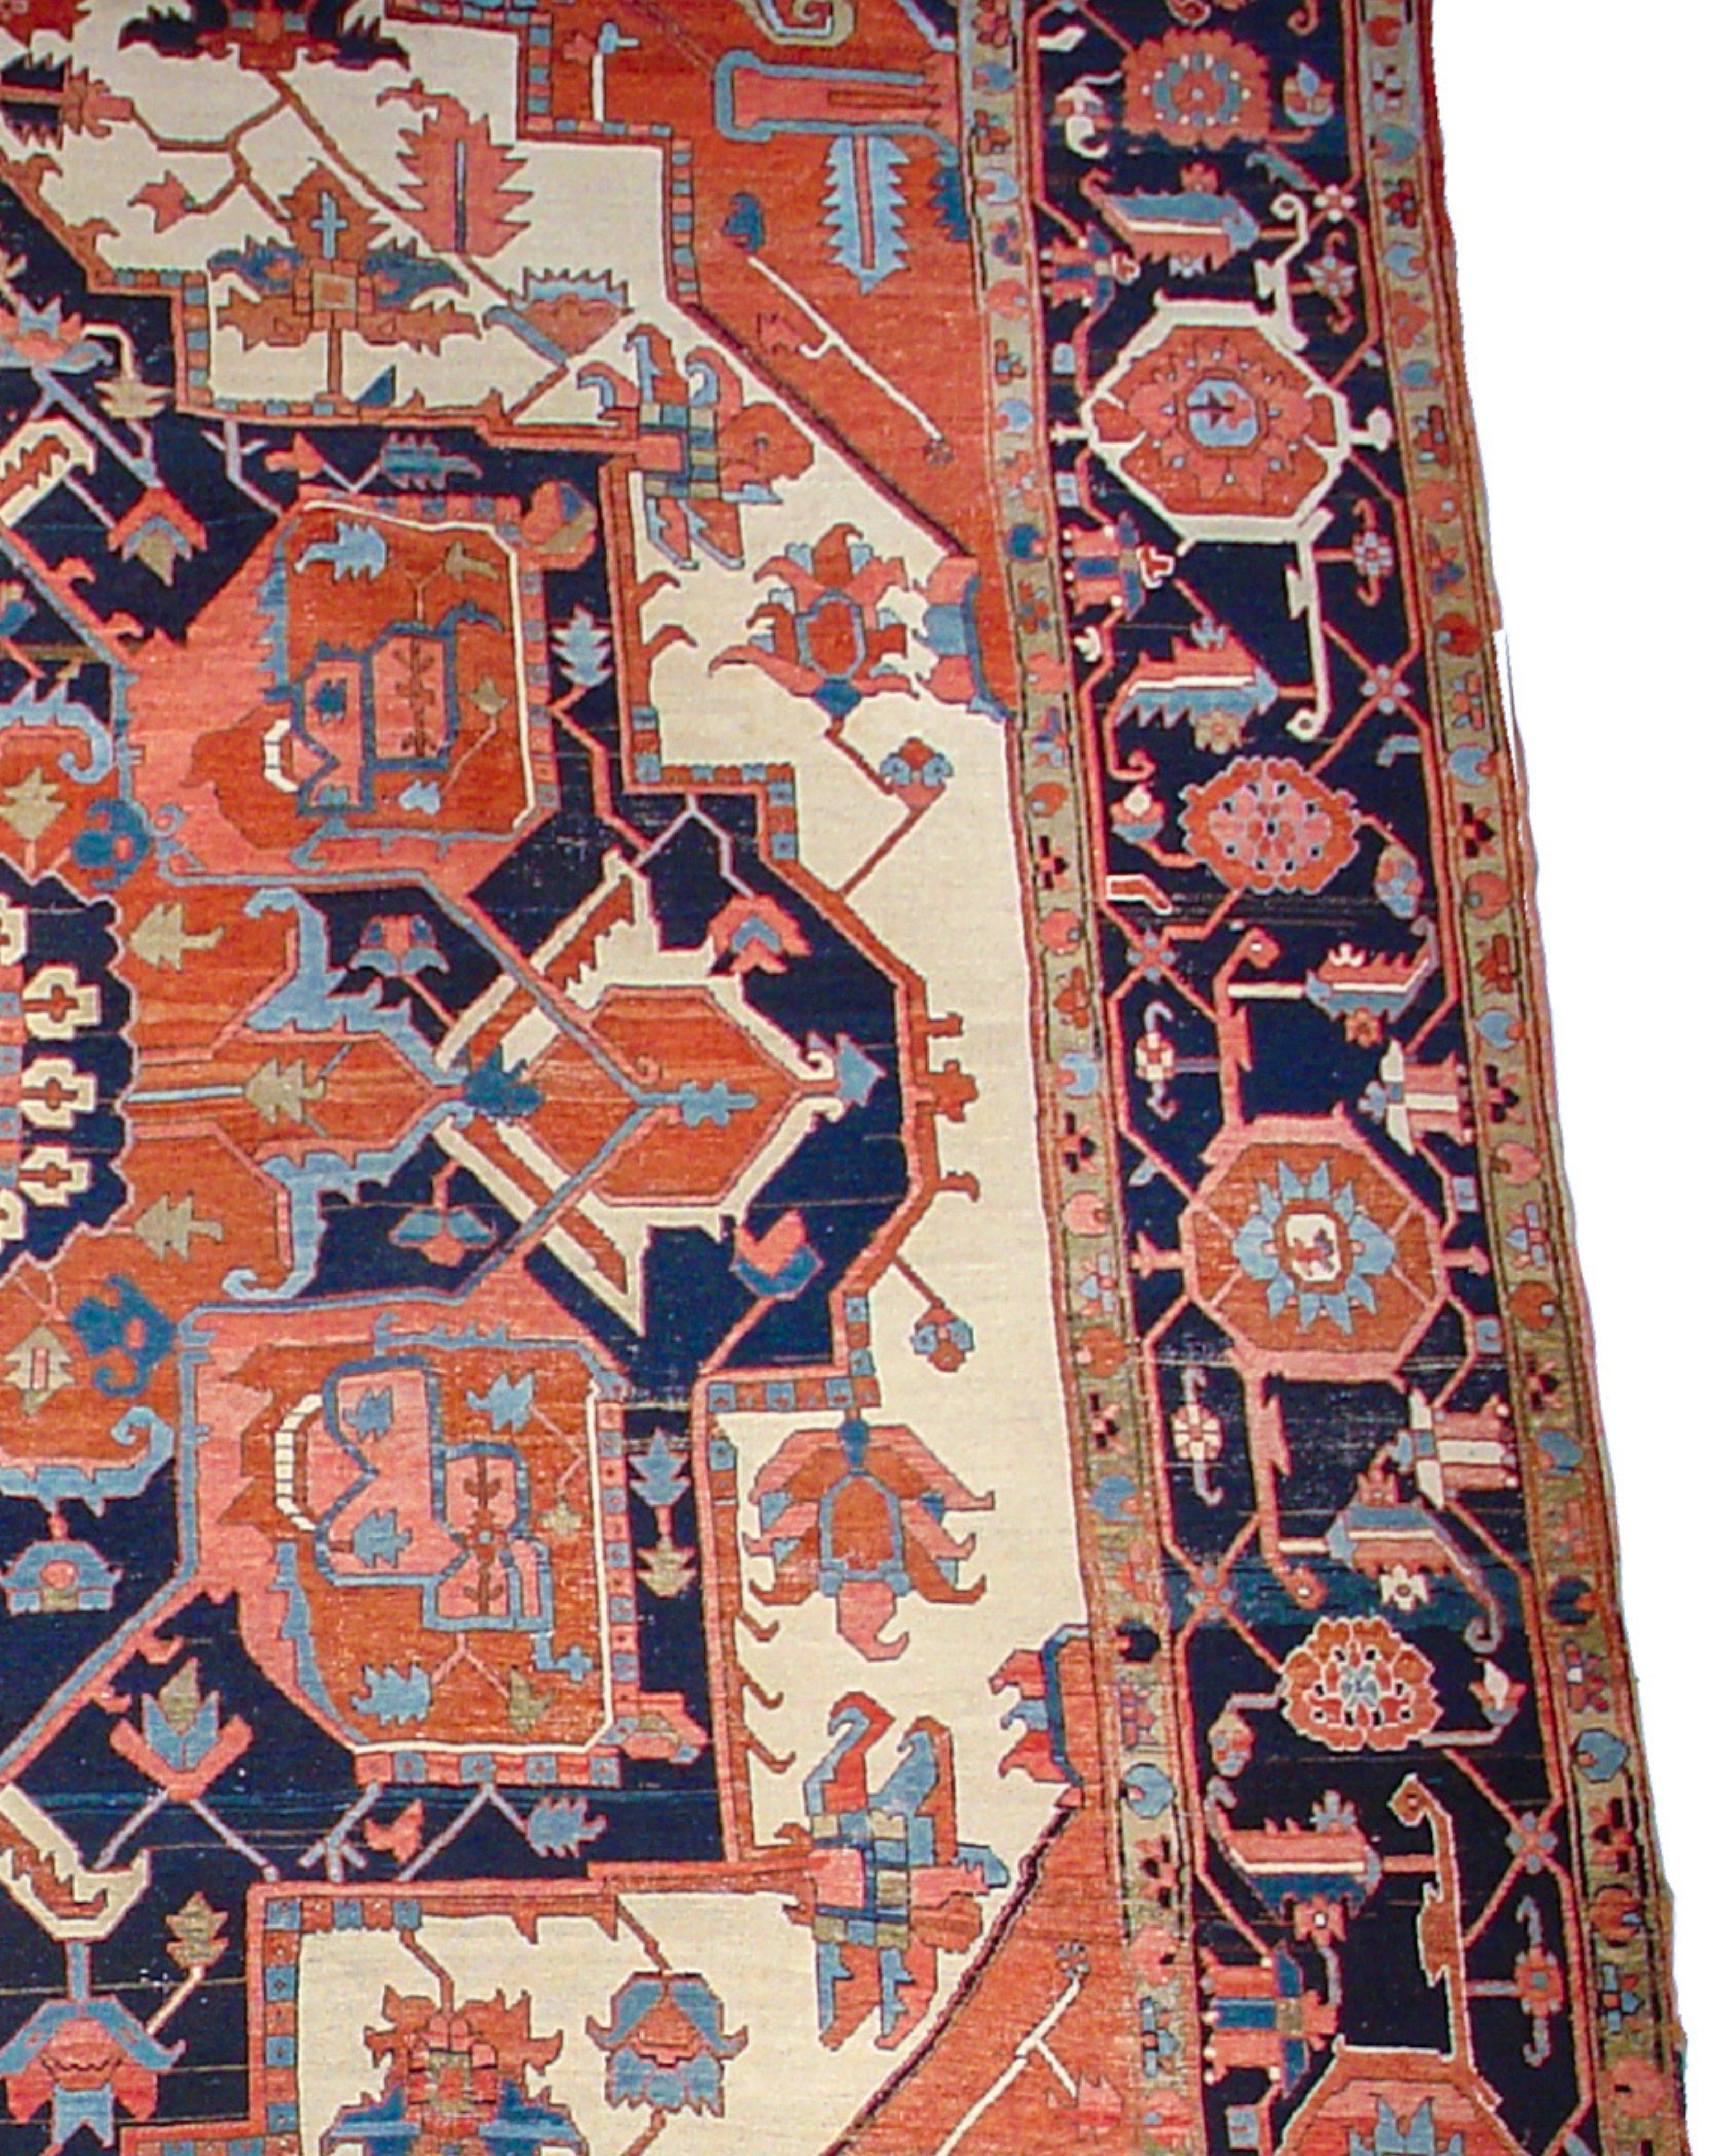 Antique Large Persian Serapi Rug, Late 19th Century

Additional Information:
Dimensions: 10'0